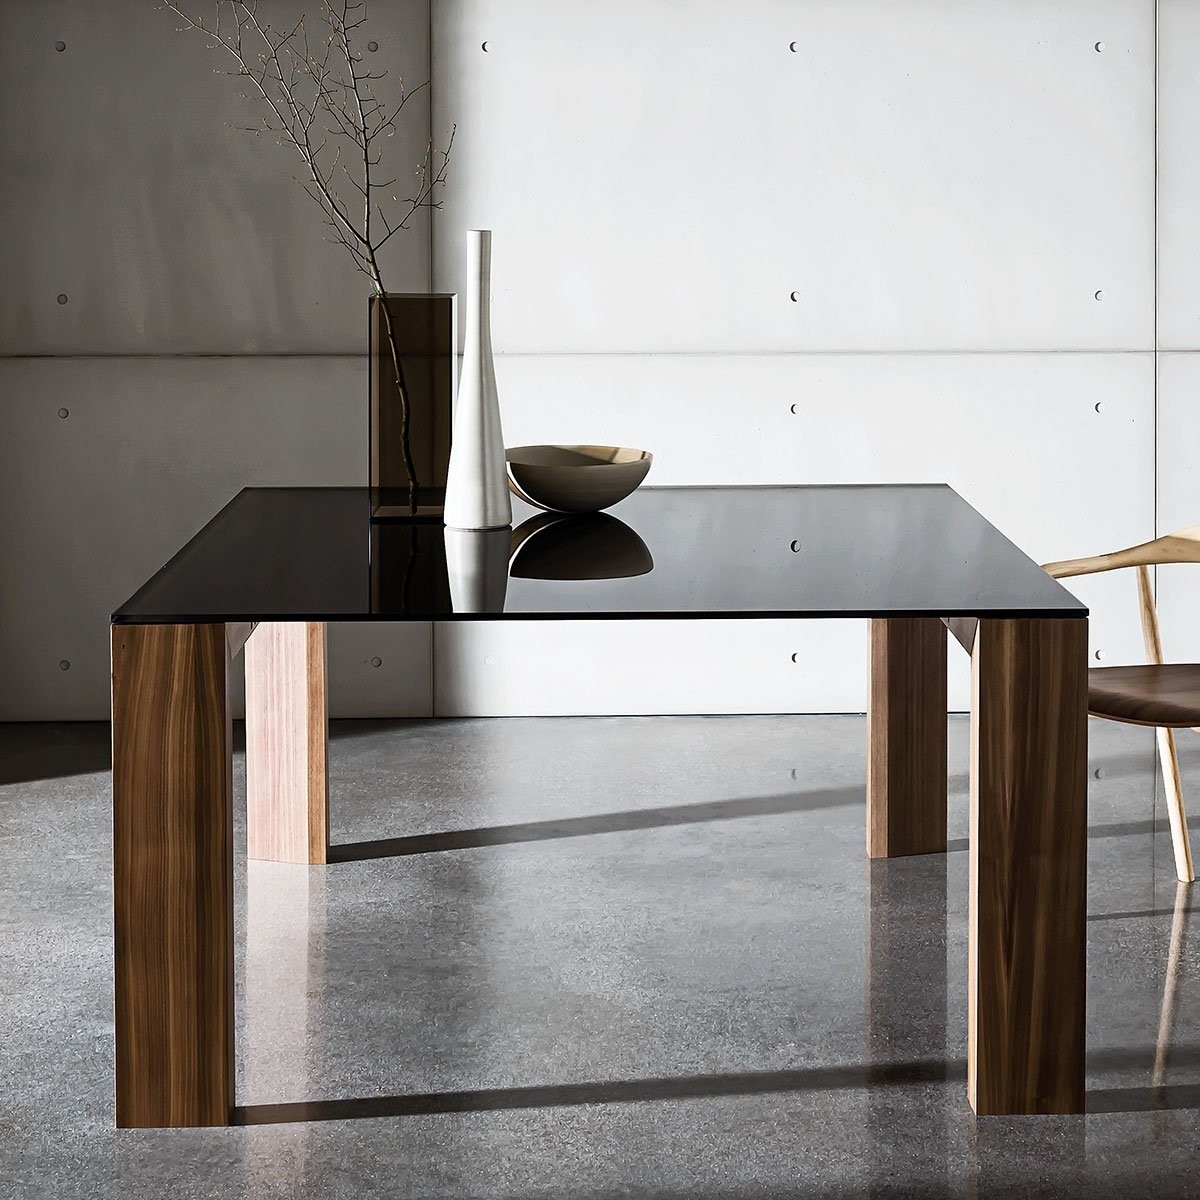 Toronto wood and glass top table klarity glass furniture